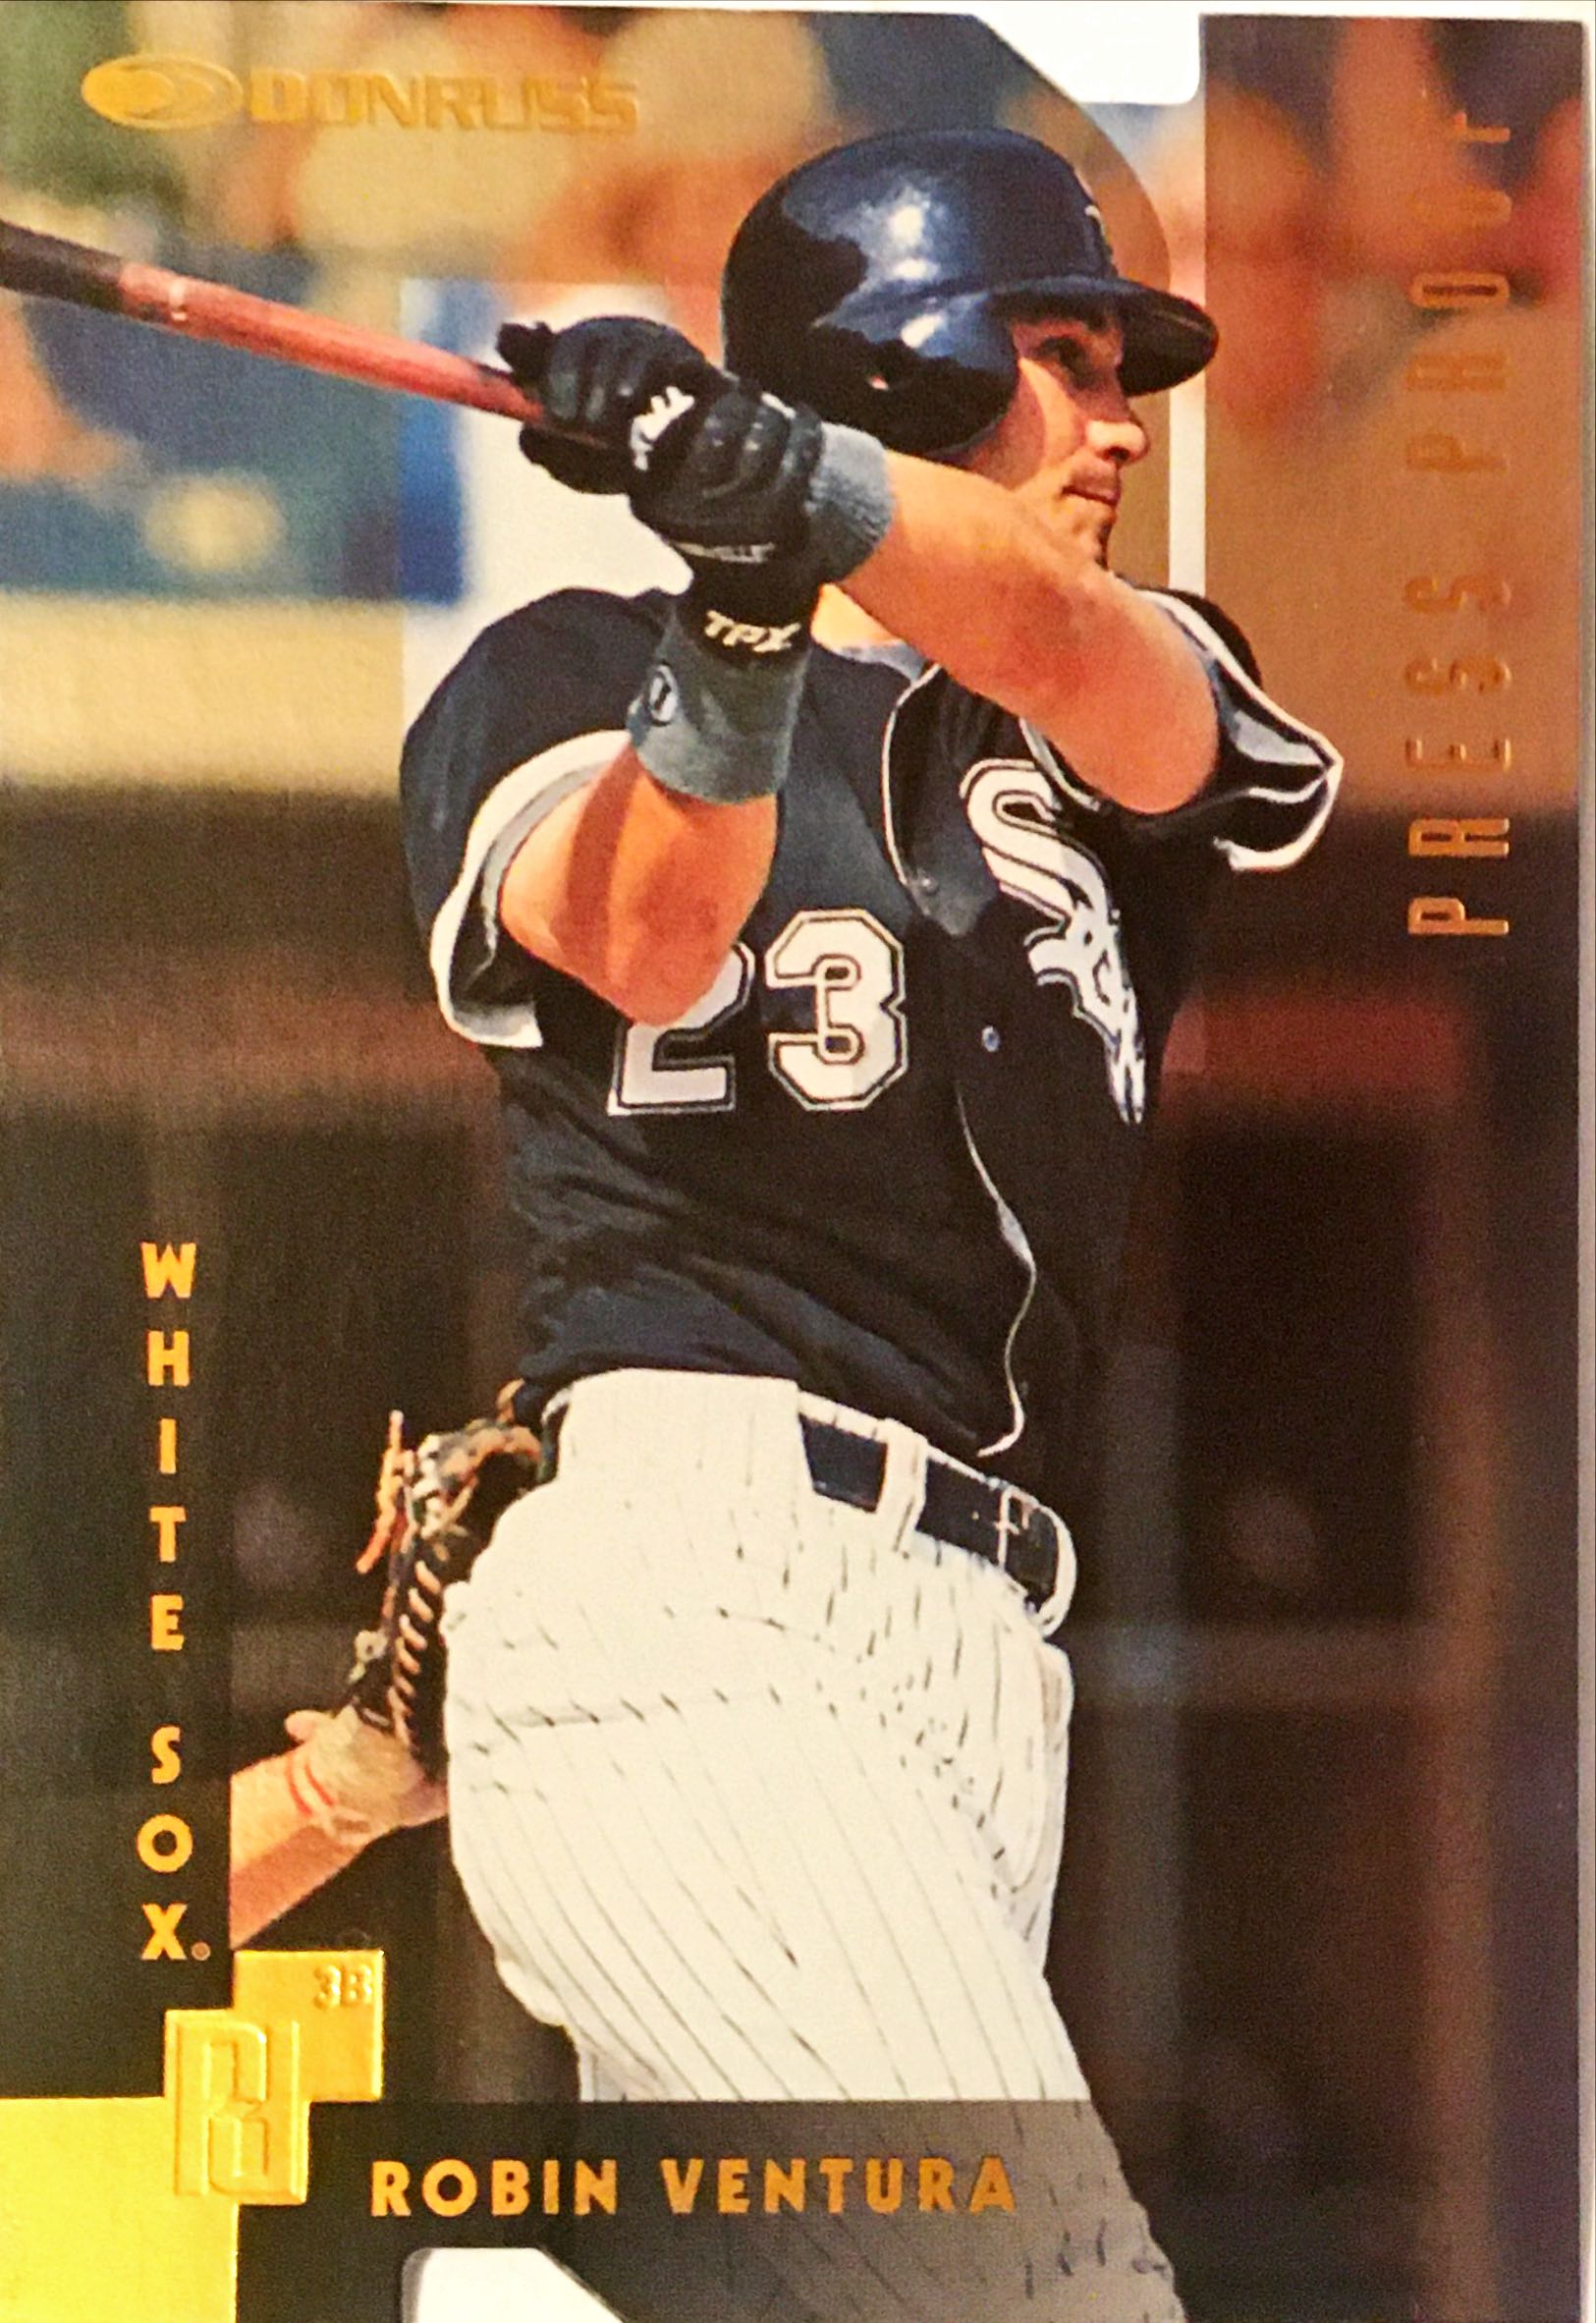 1997 Donruss Gold Press Proofs 22 front image